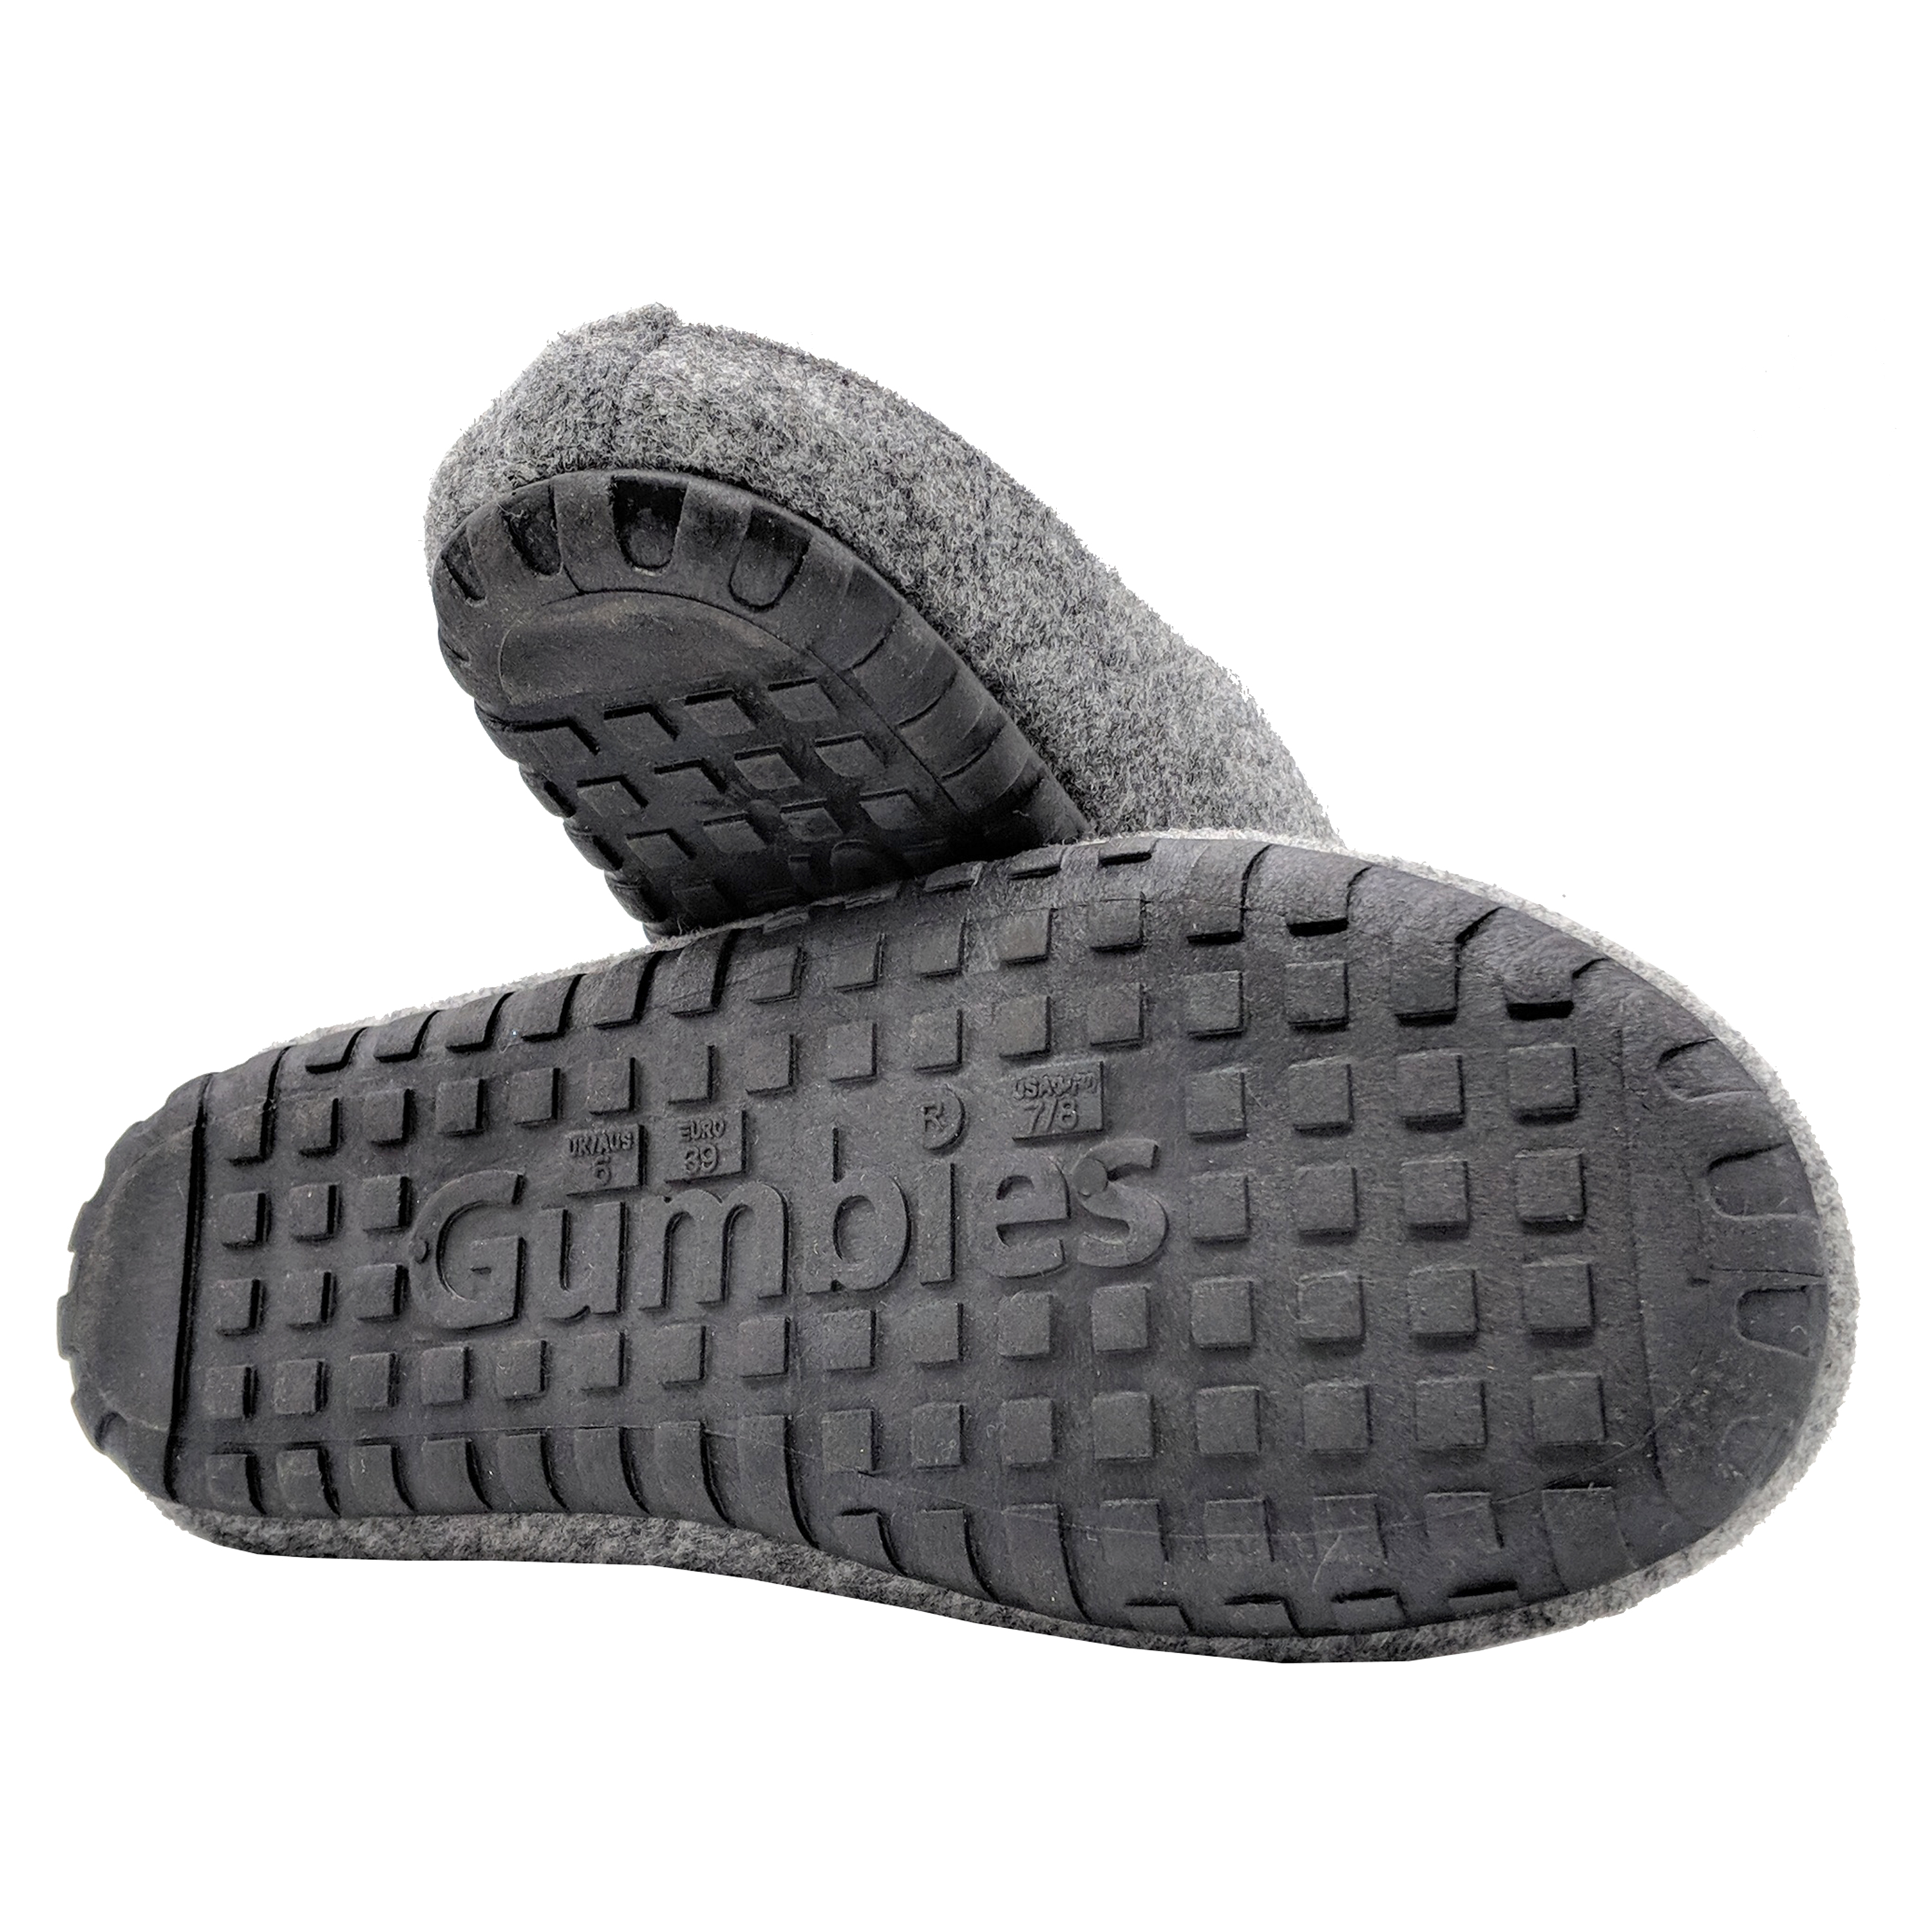 GUMBIES – Outback Slipper, GREY-CHARCOAL 